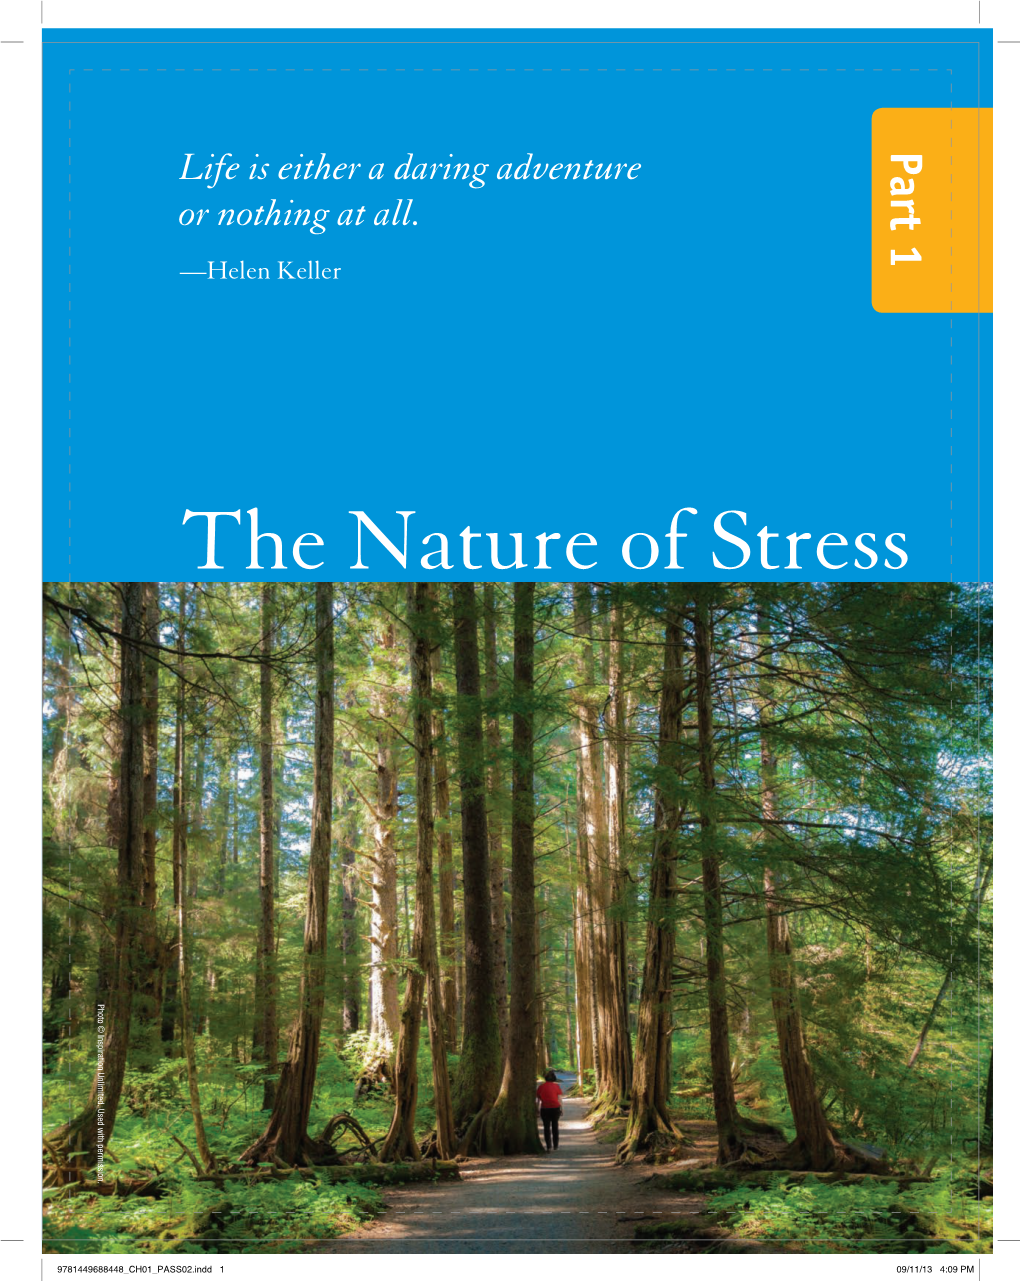 The Nature of Stress Photo © Inspiration Unlimited